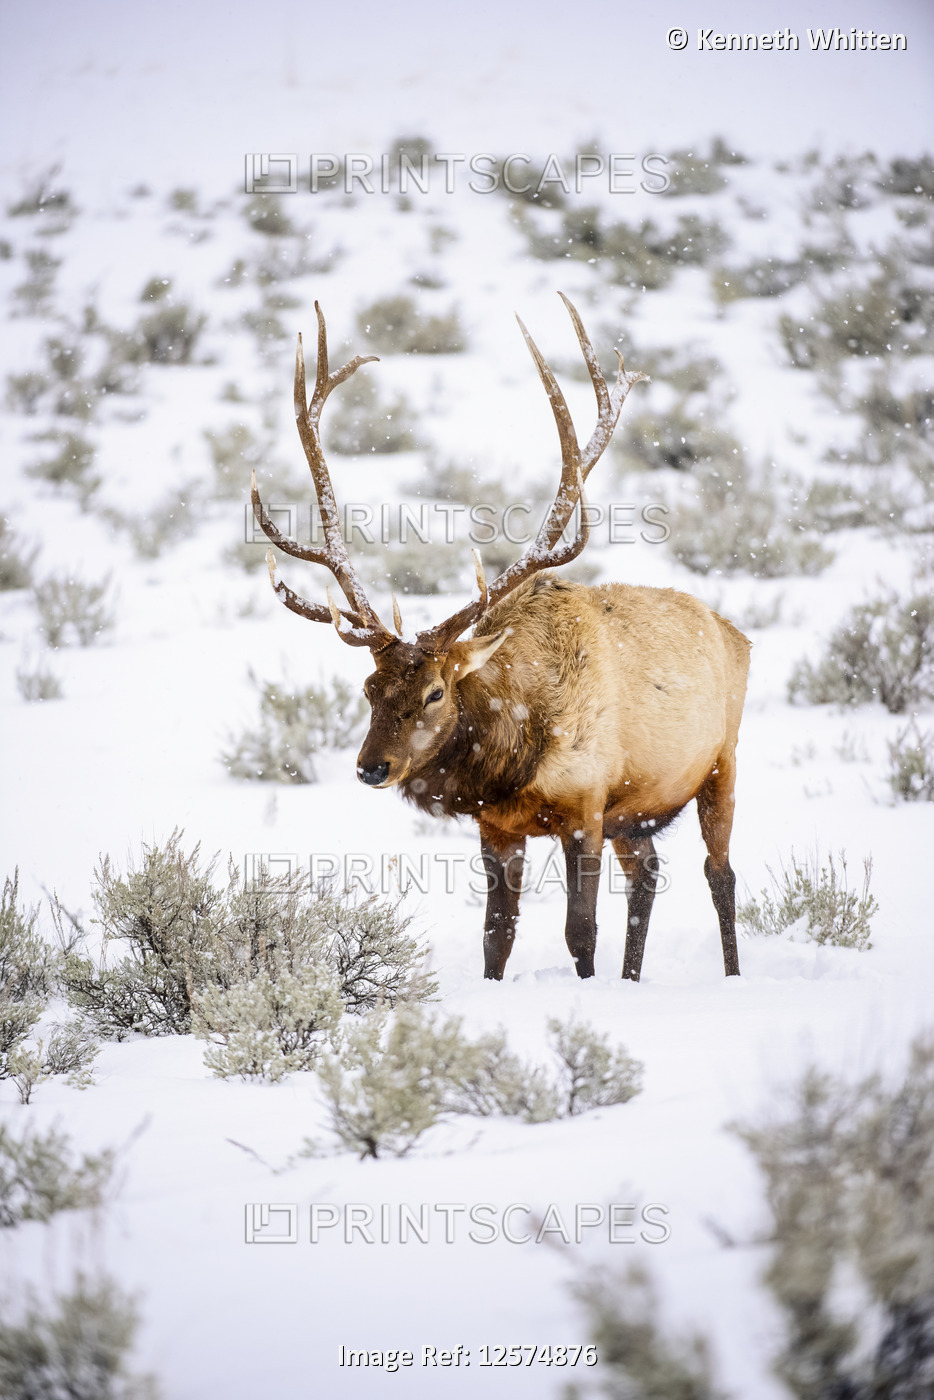 Bull elk with majestic antlers in snowstorm, Yellowstone National Park, Wyoming, USA